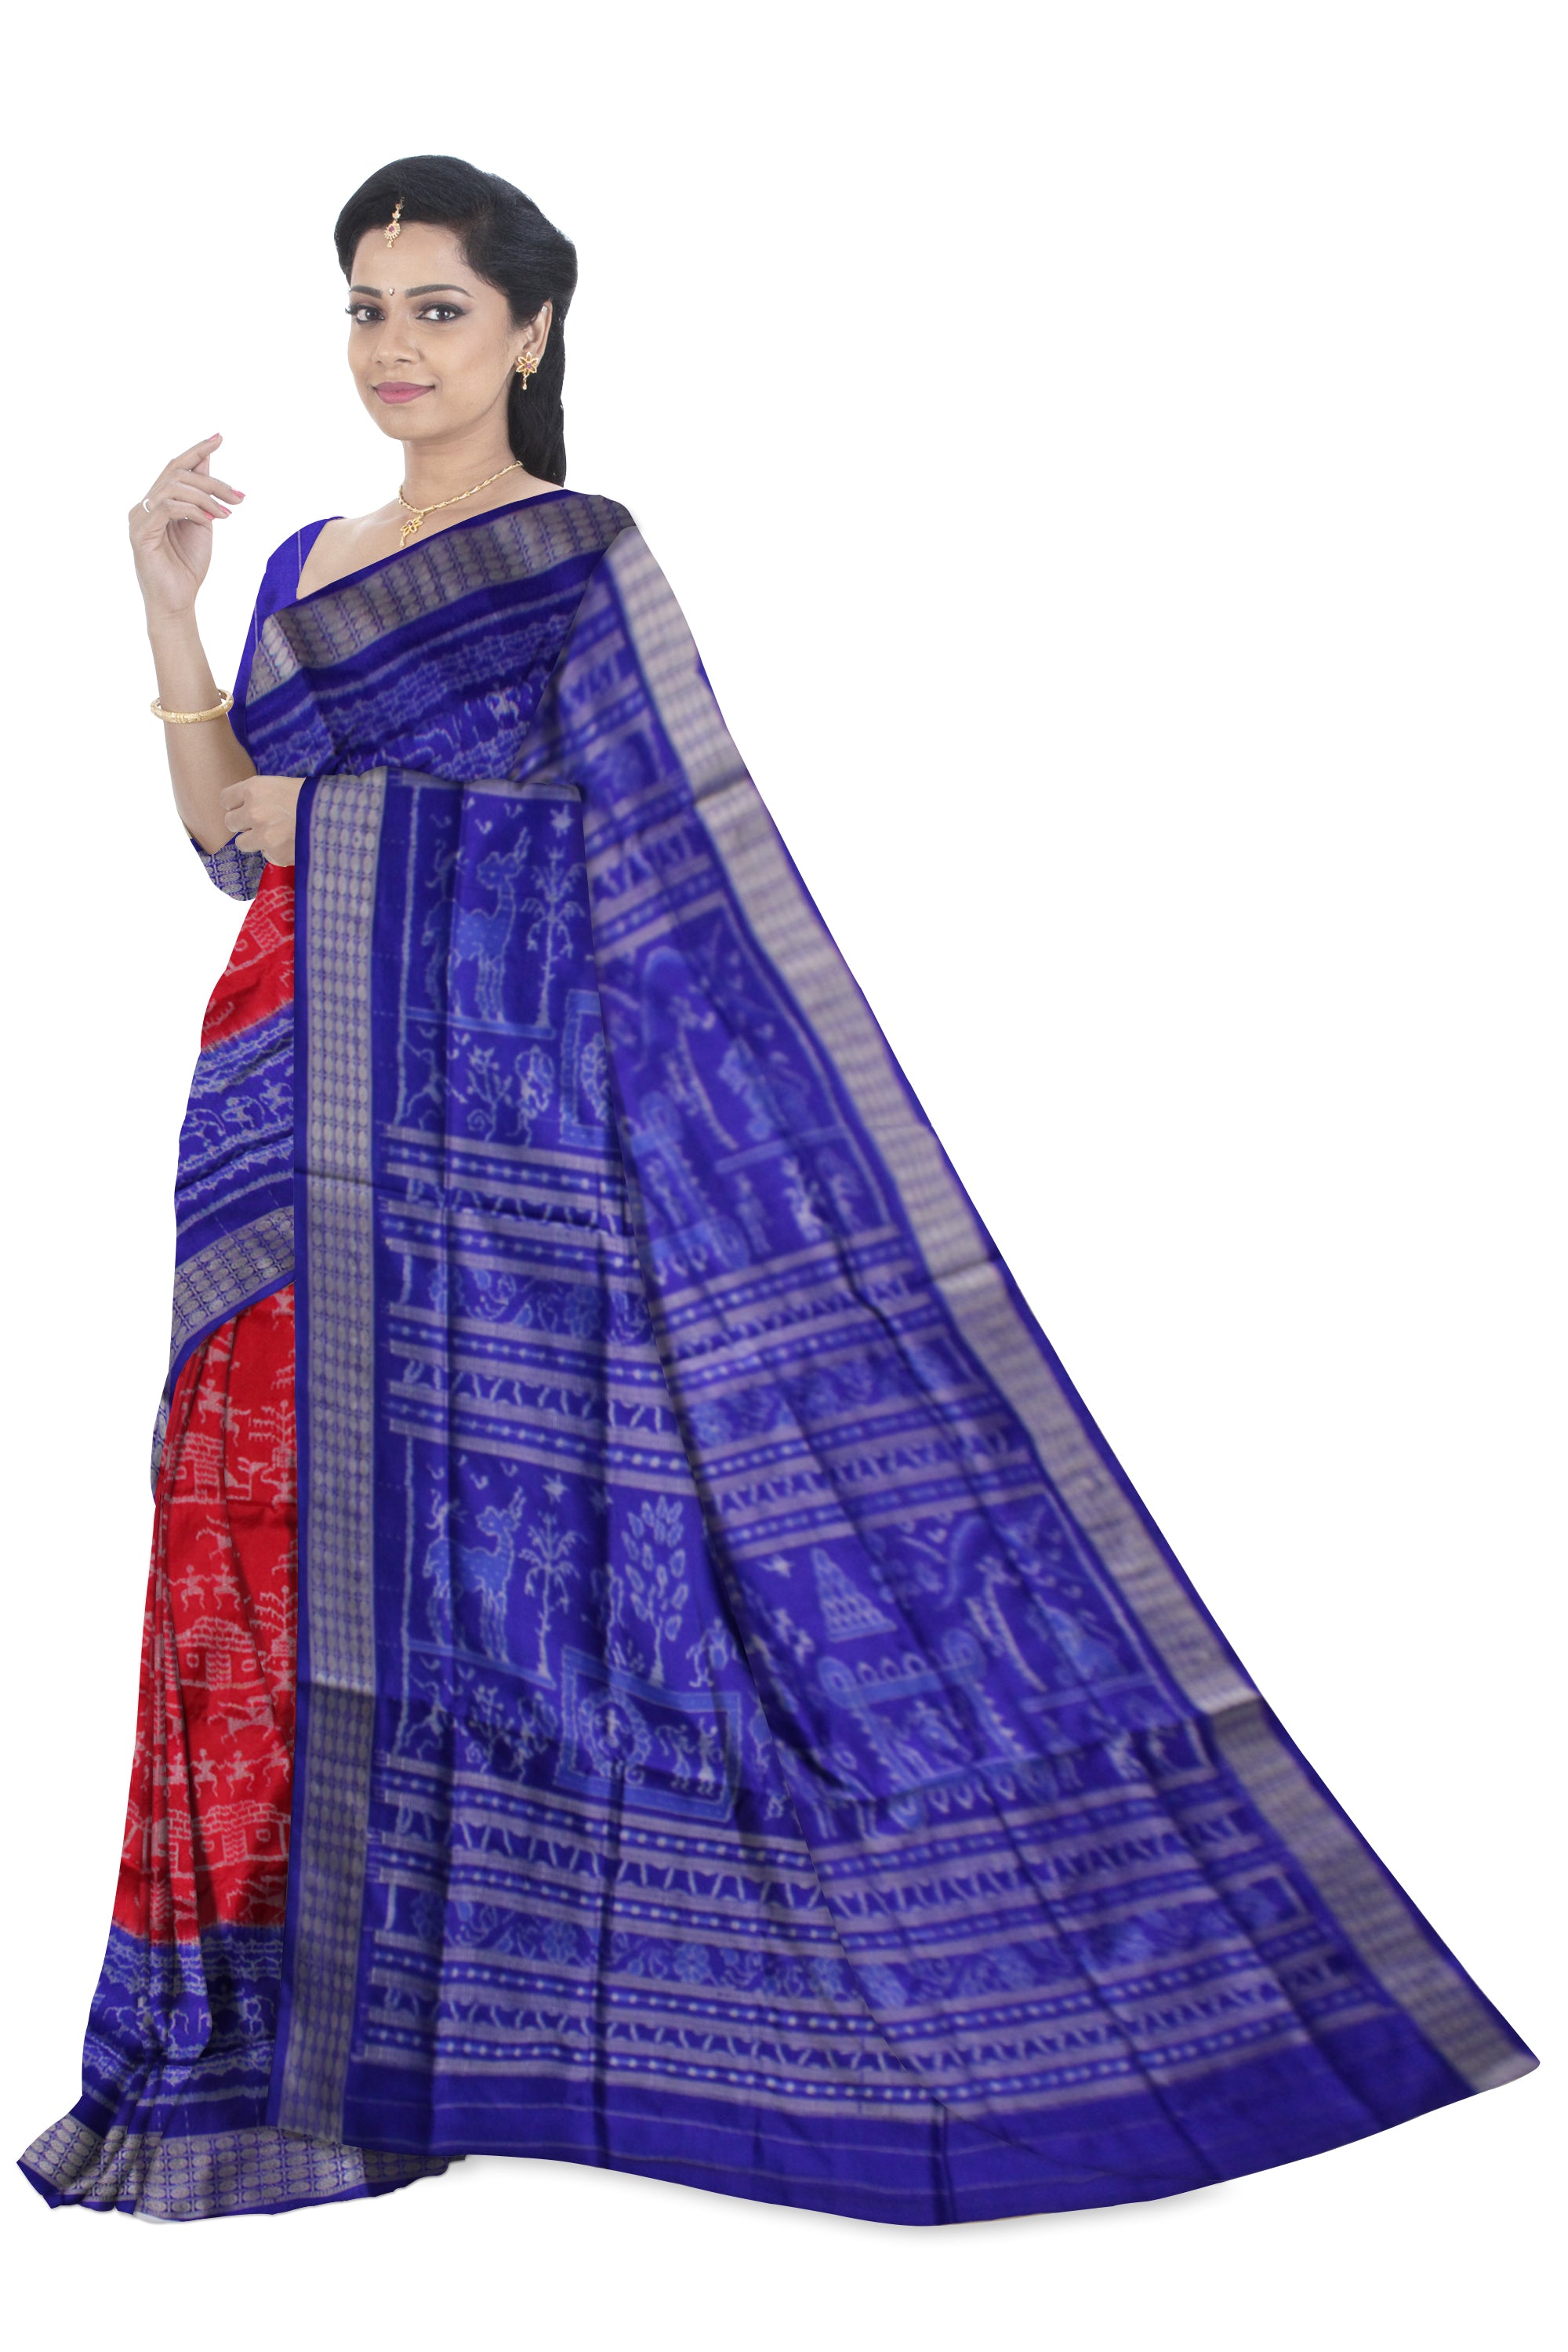 TRADITIONAL VILLAGE PATTERN  PALLU WITH BODY TERRACOTTA PATTERN PURE SILK SAREE IS RED AND BLUE COLOR BASE,COMES WITH MATCHING BLOUSE PIECE. - Koshali Arts & Crafts Enterprise